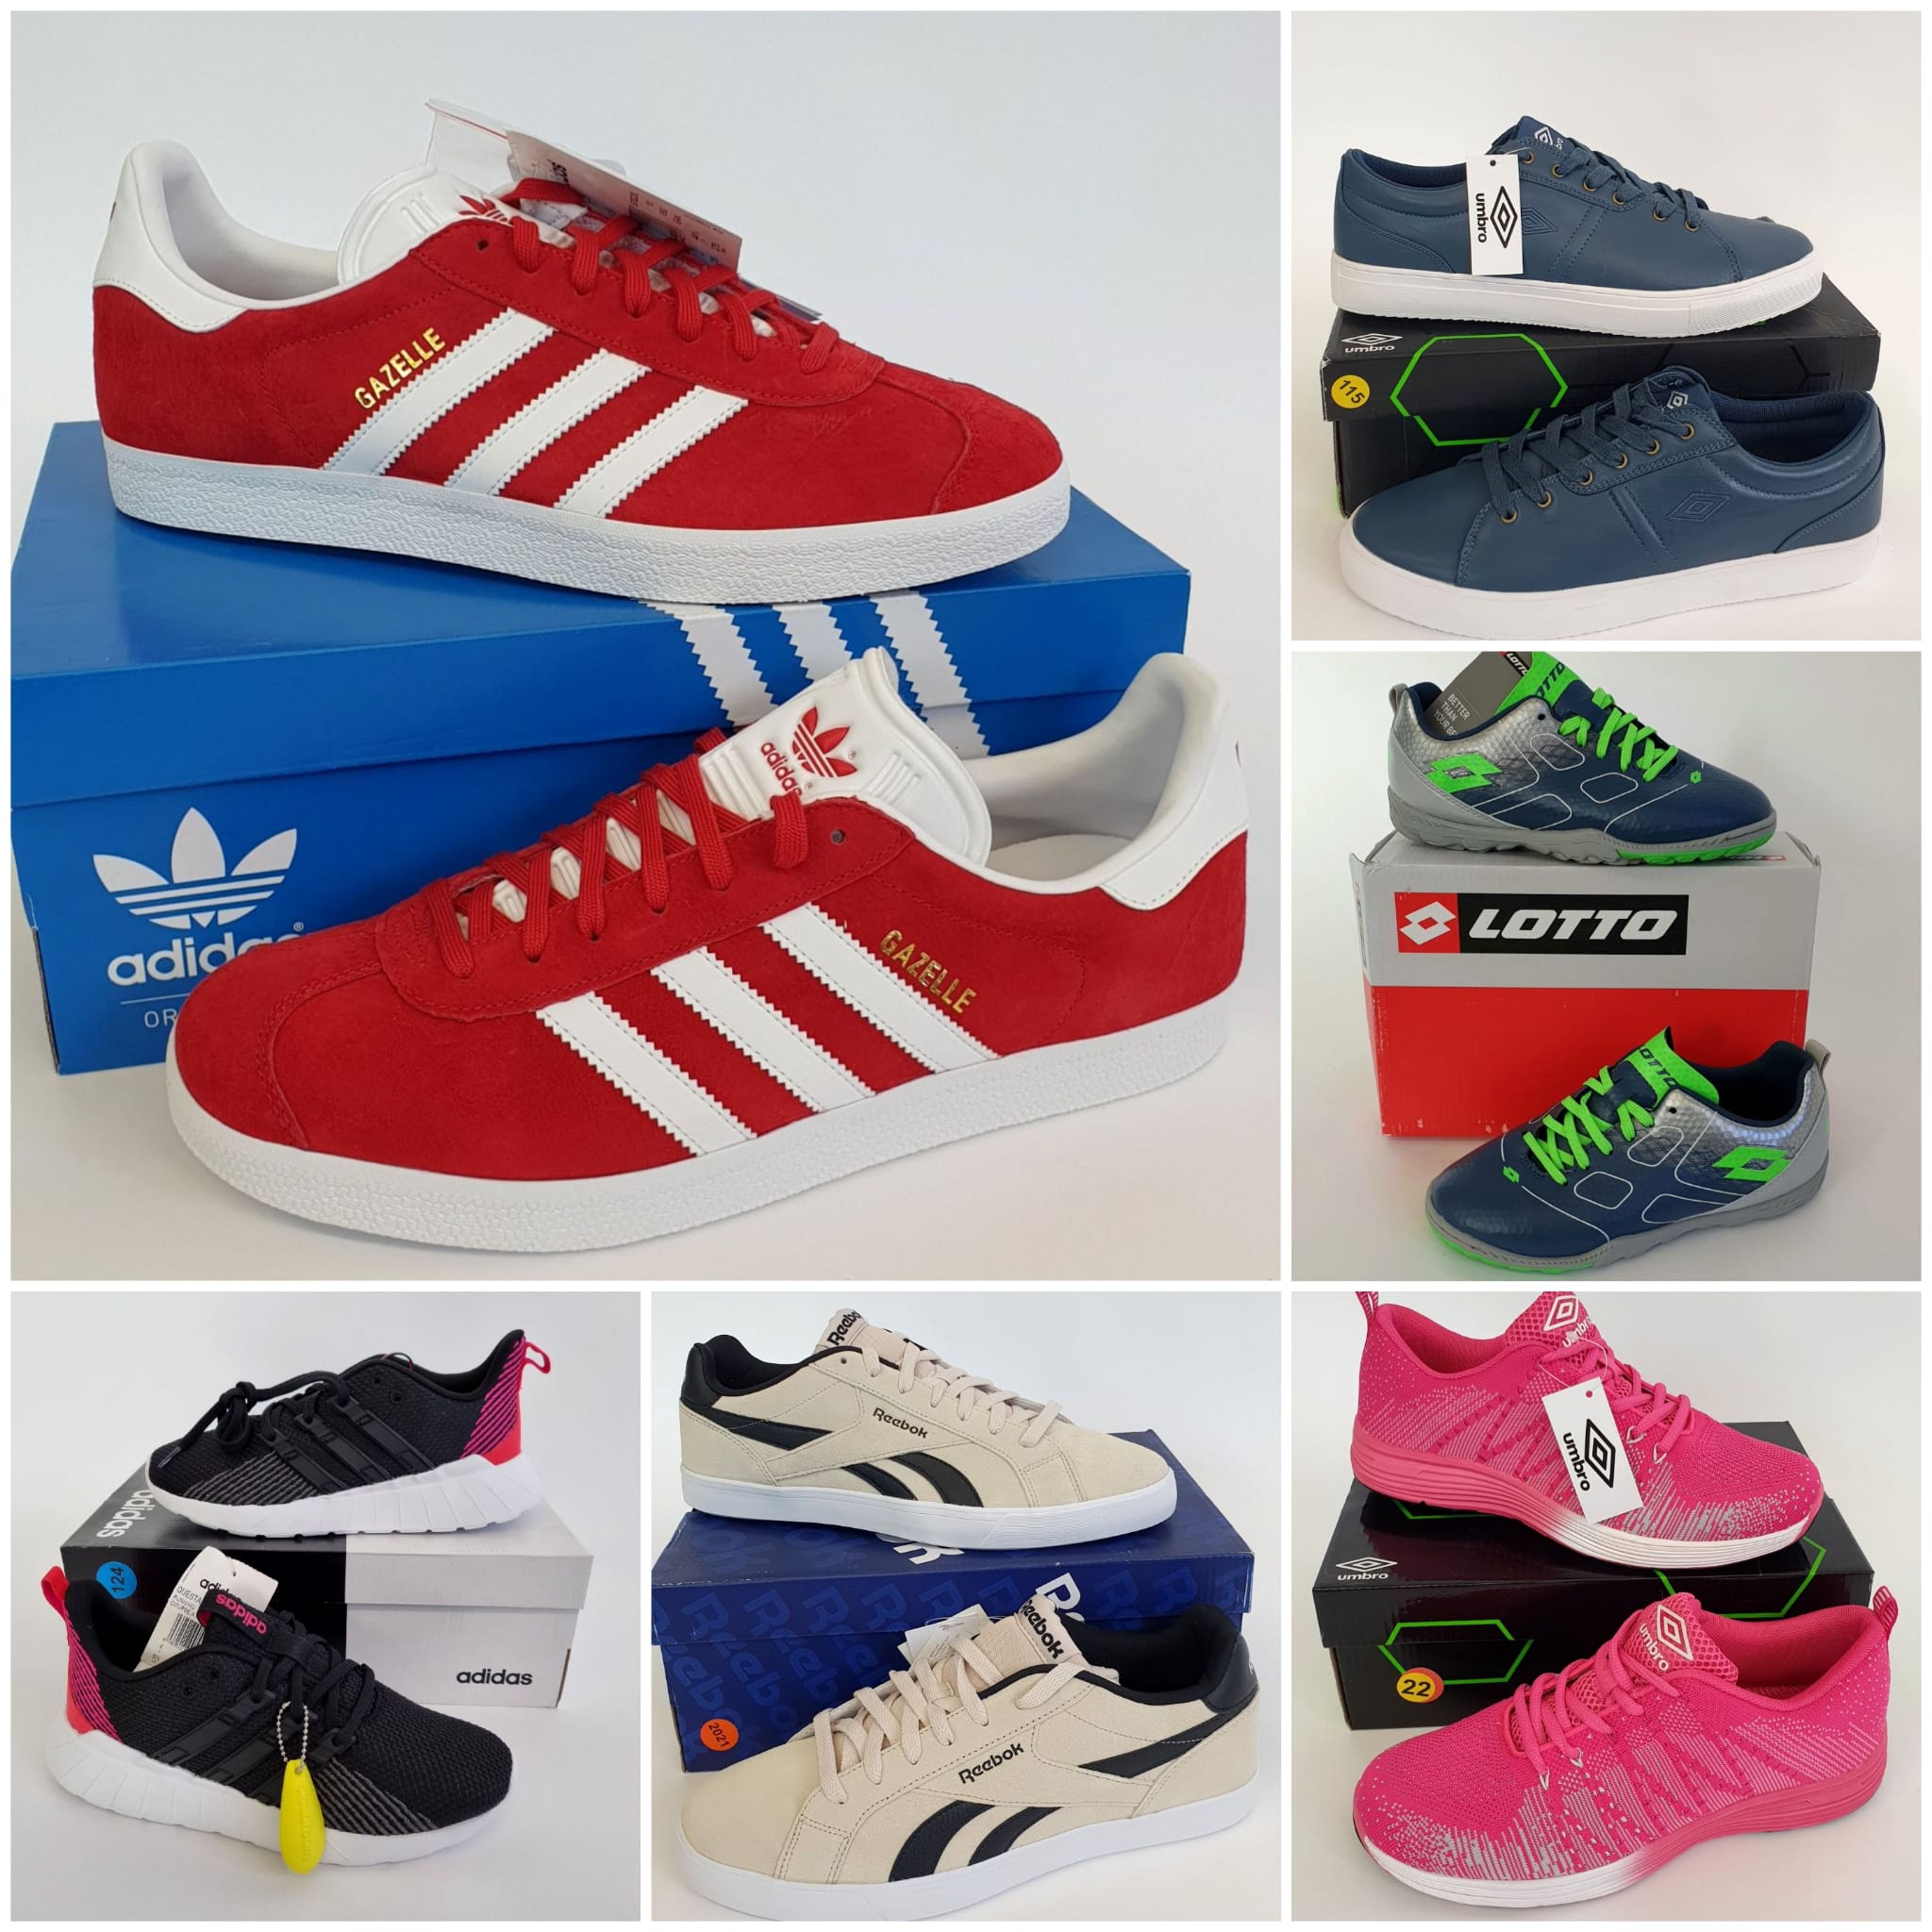  Men's, women's and children's sports shoes